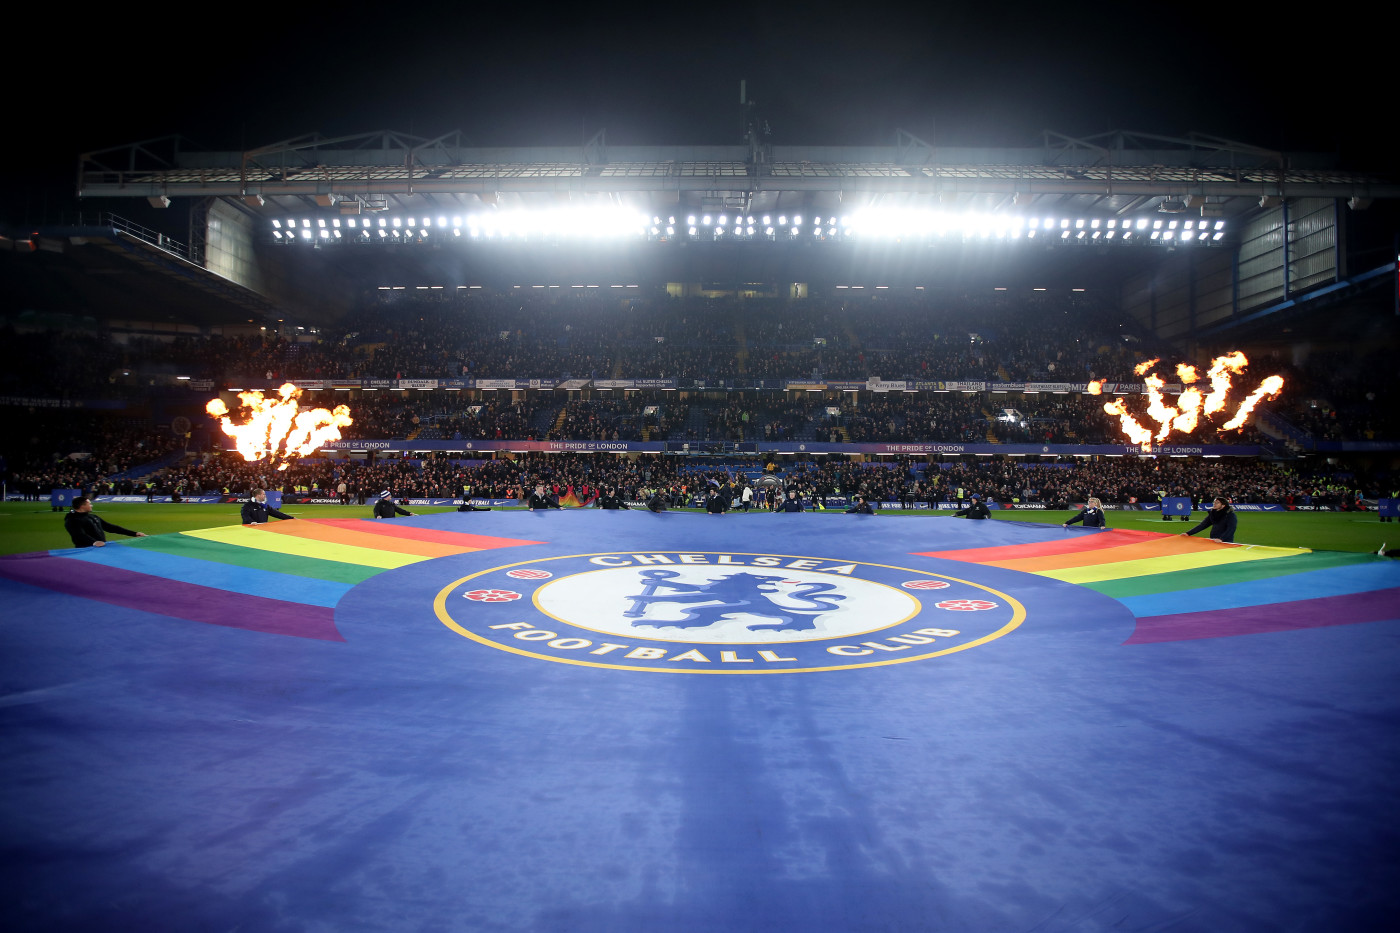 Man City, Chelsea and more Premier League clubs trolled for LGBT support